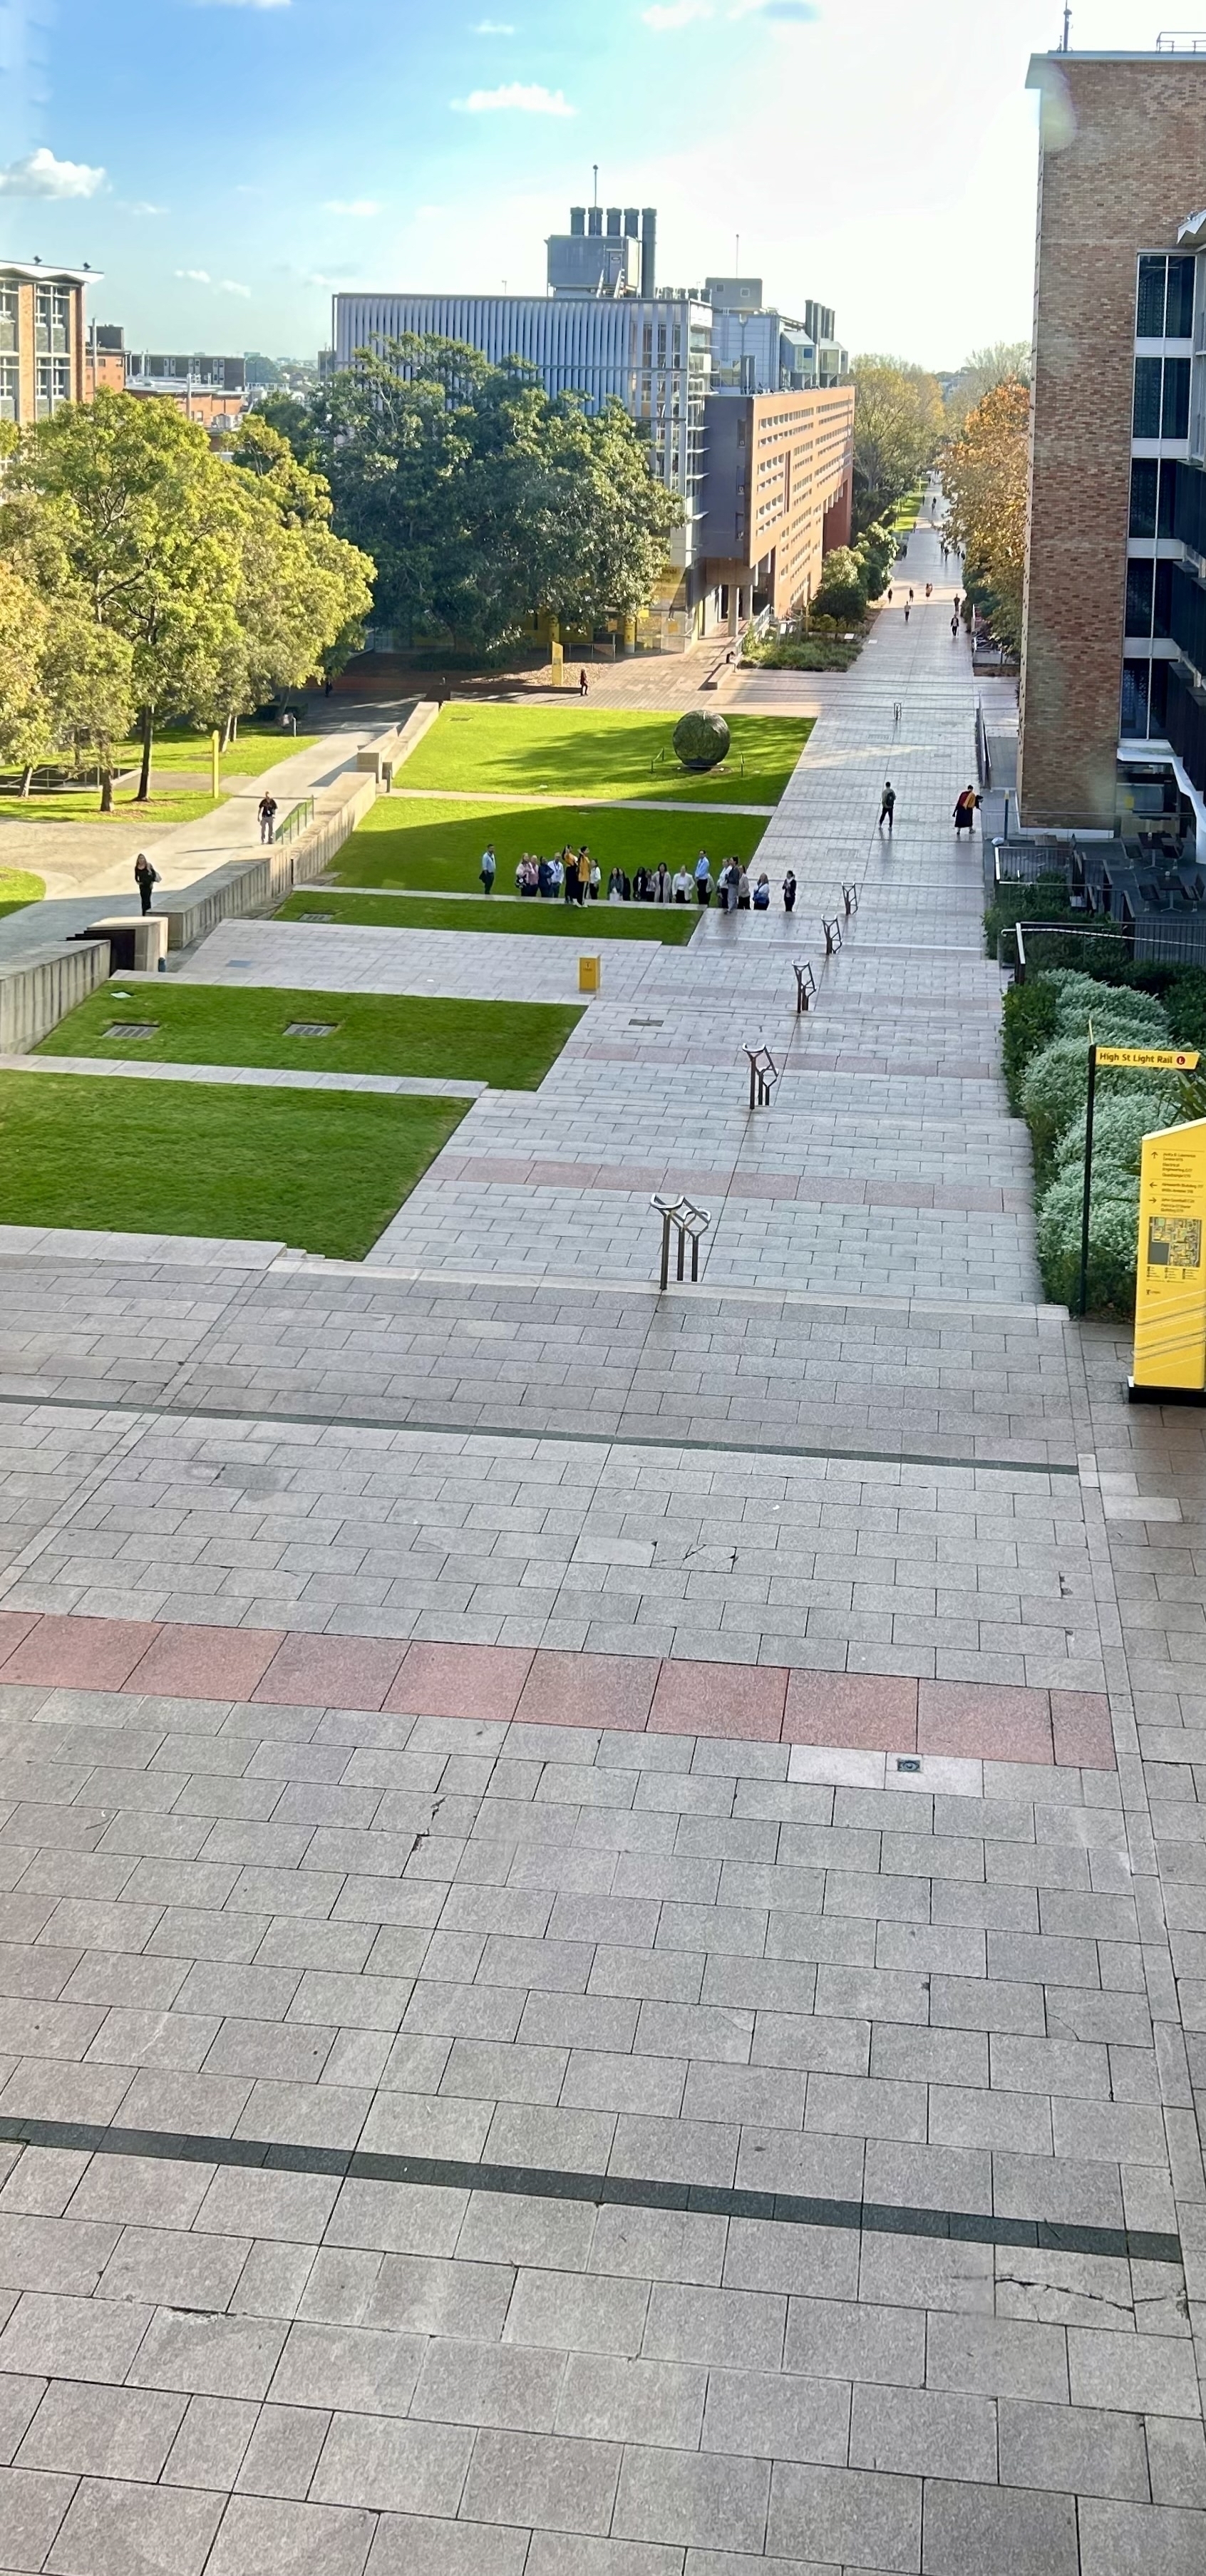 Elevated view of a long walkway at UNSW. People are visible in the distance, flanked by buildings.  